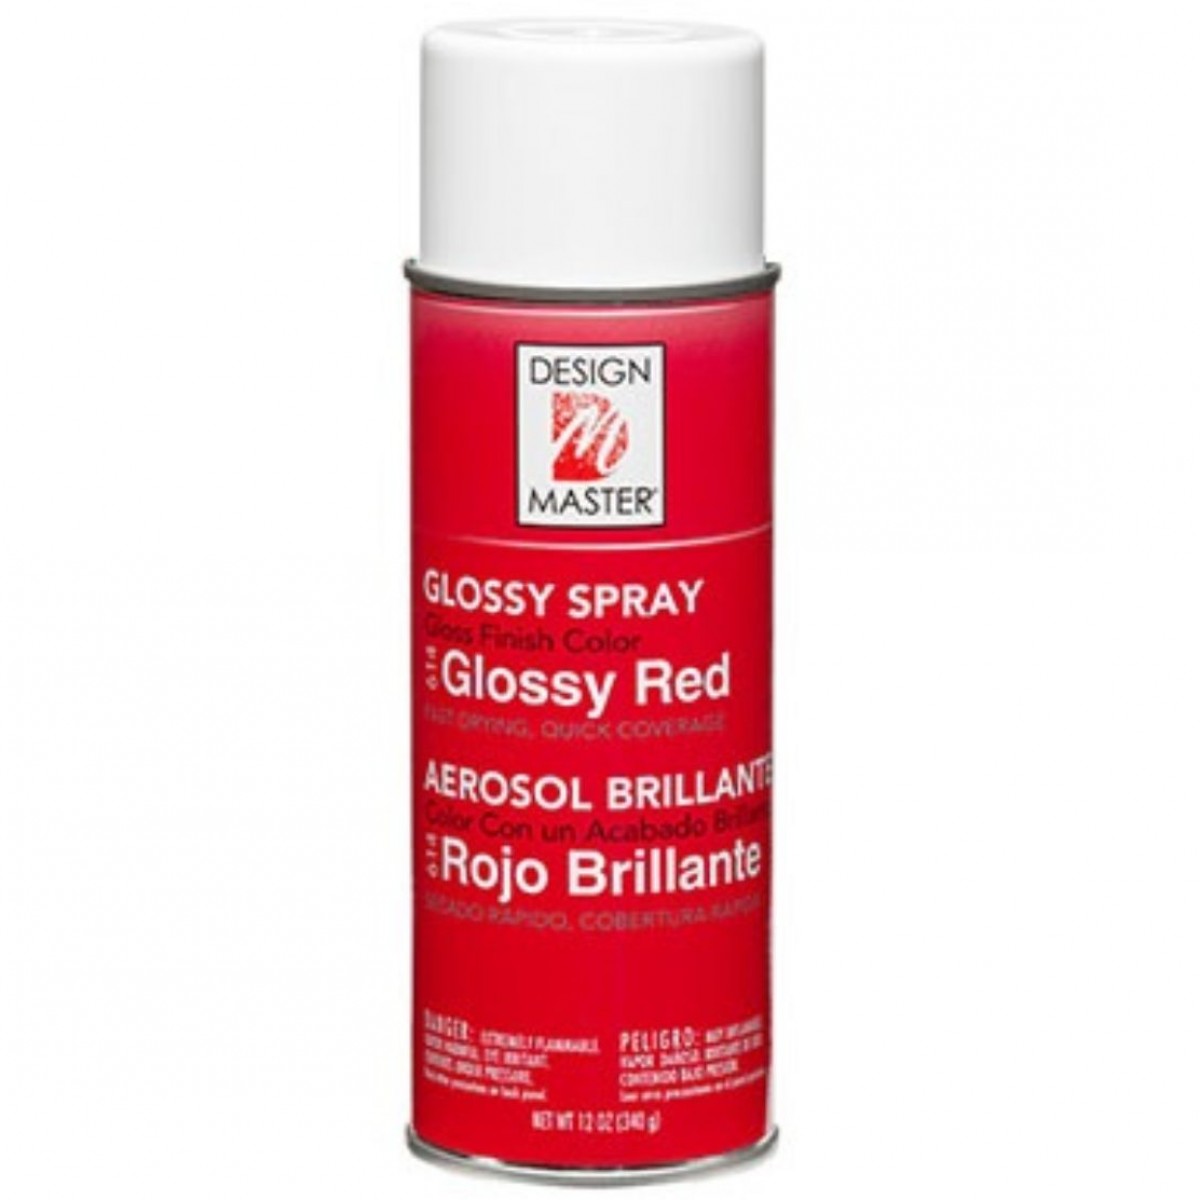 614 Glossy Red DM Colour Spray Paint - 1 No